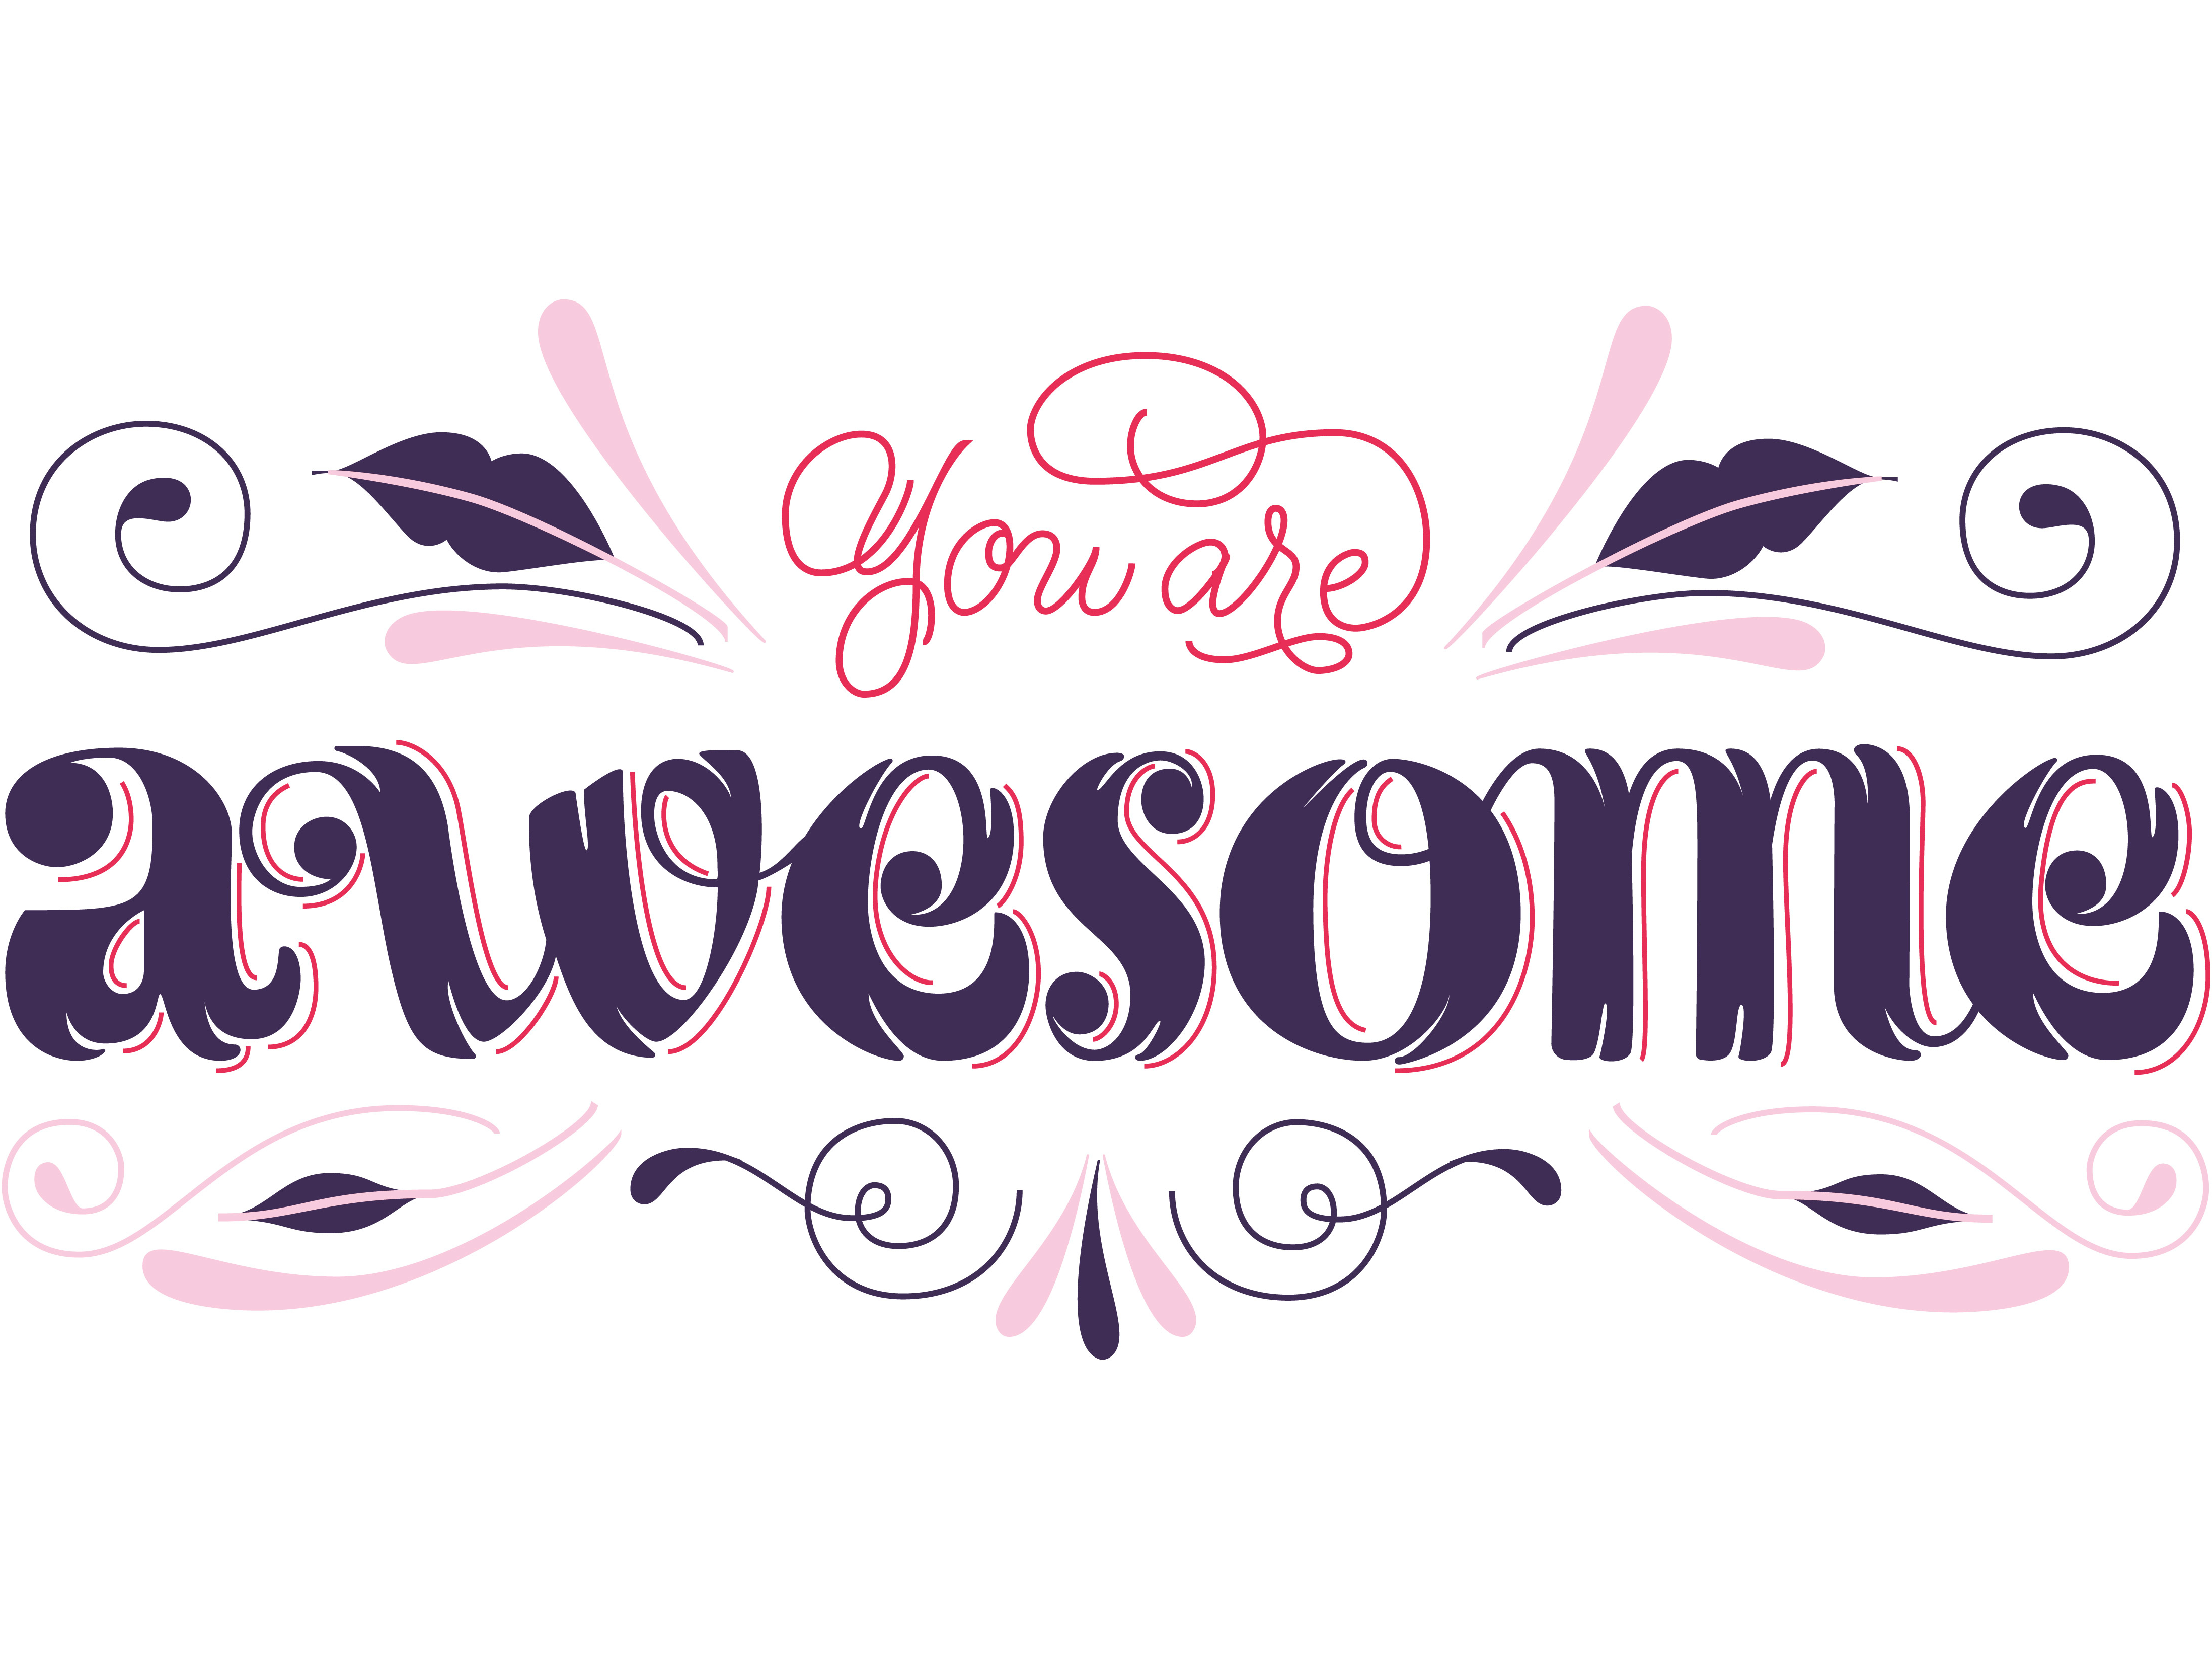 You Are Awesome 01 by Tatiana López on Dribbble